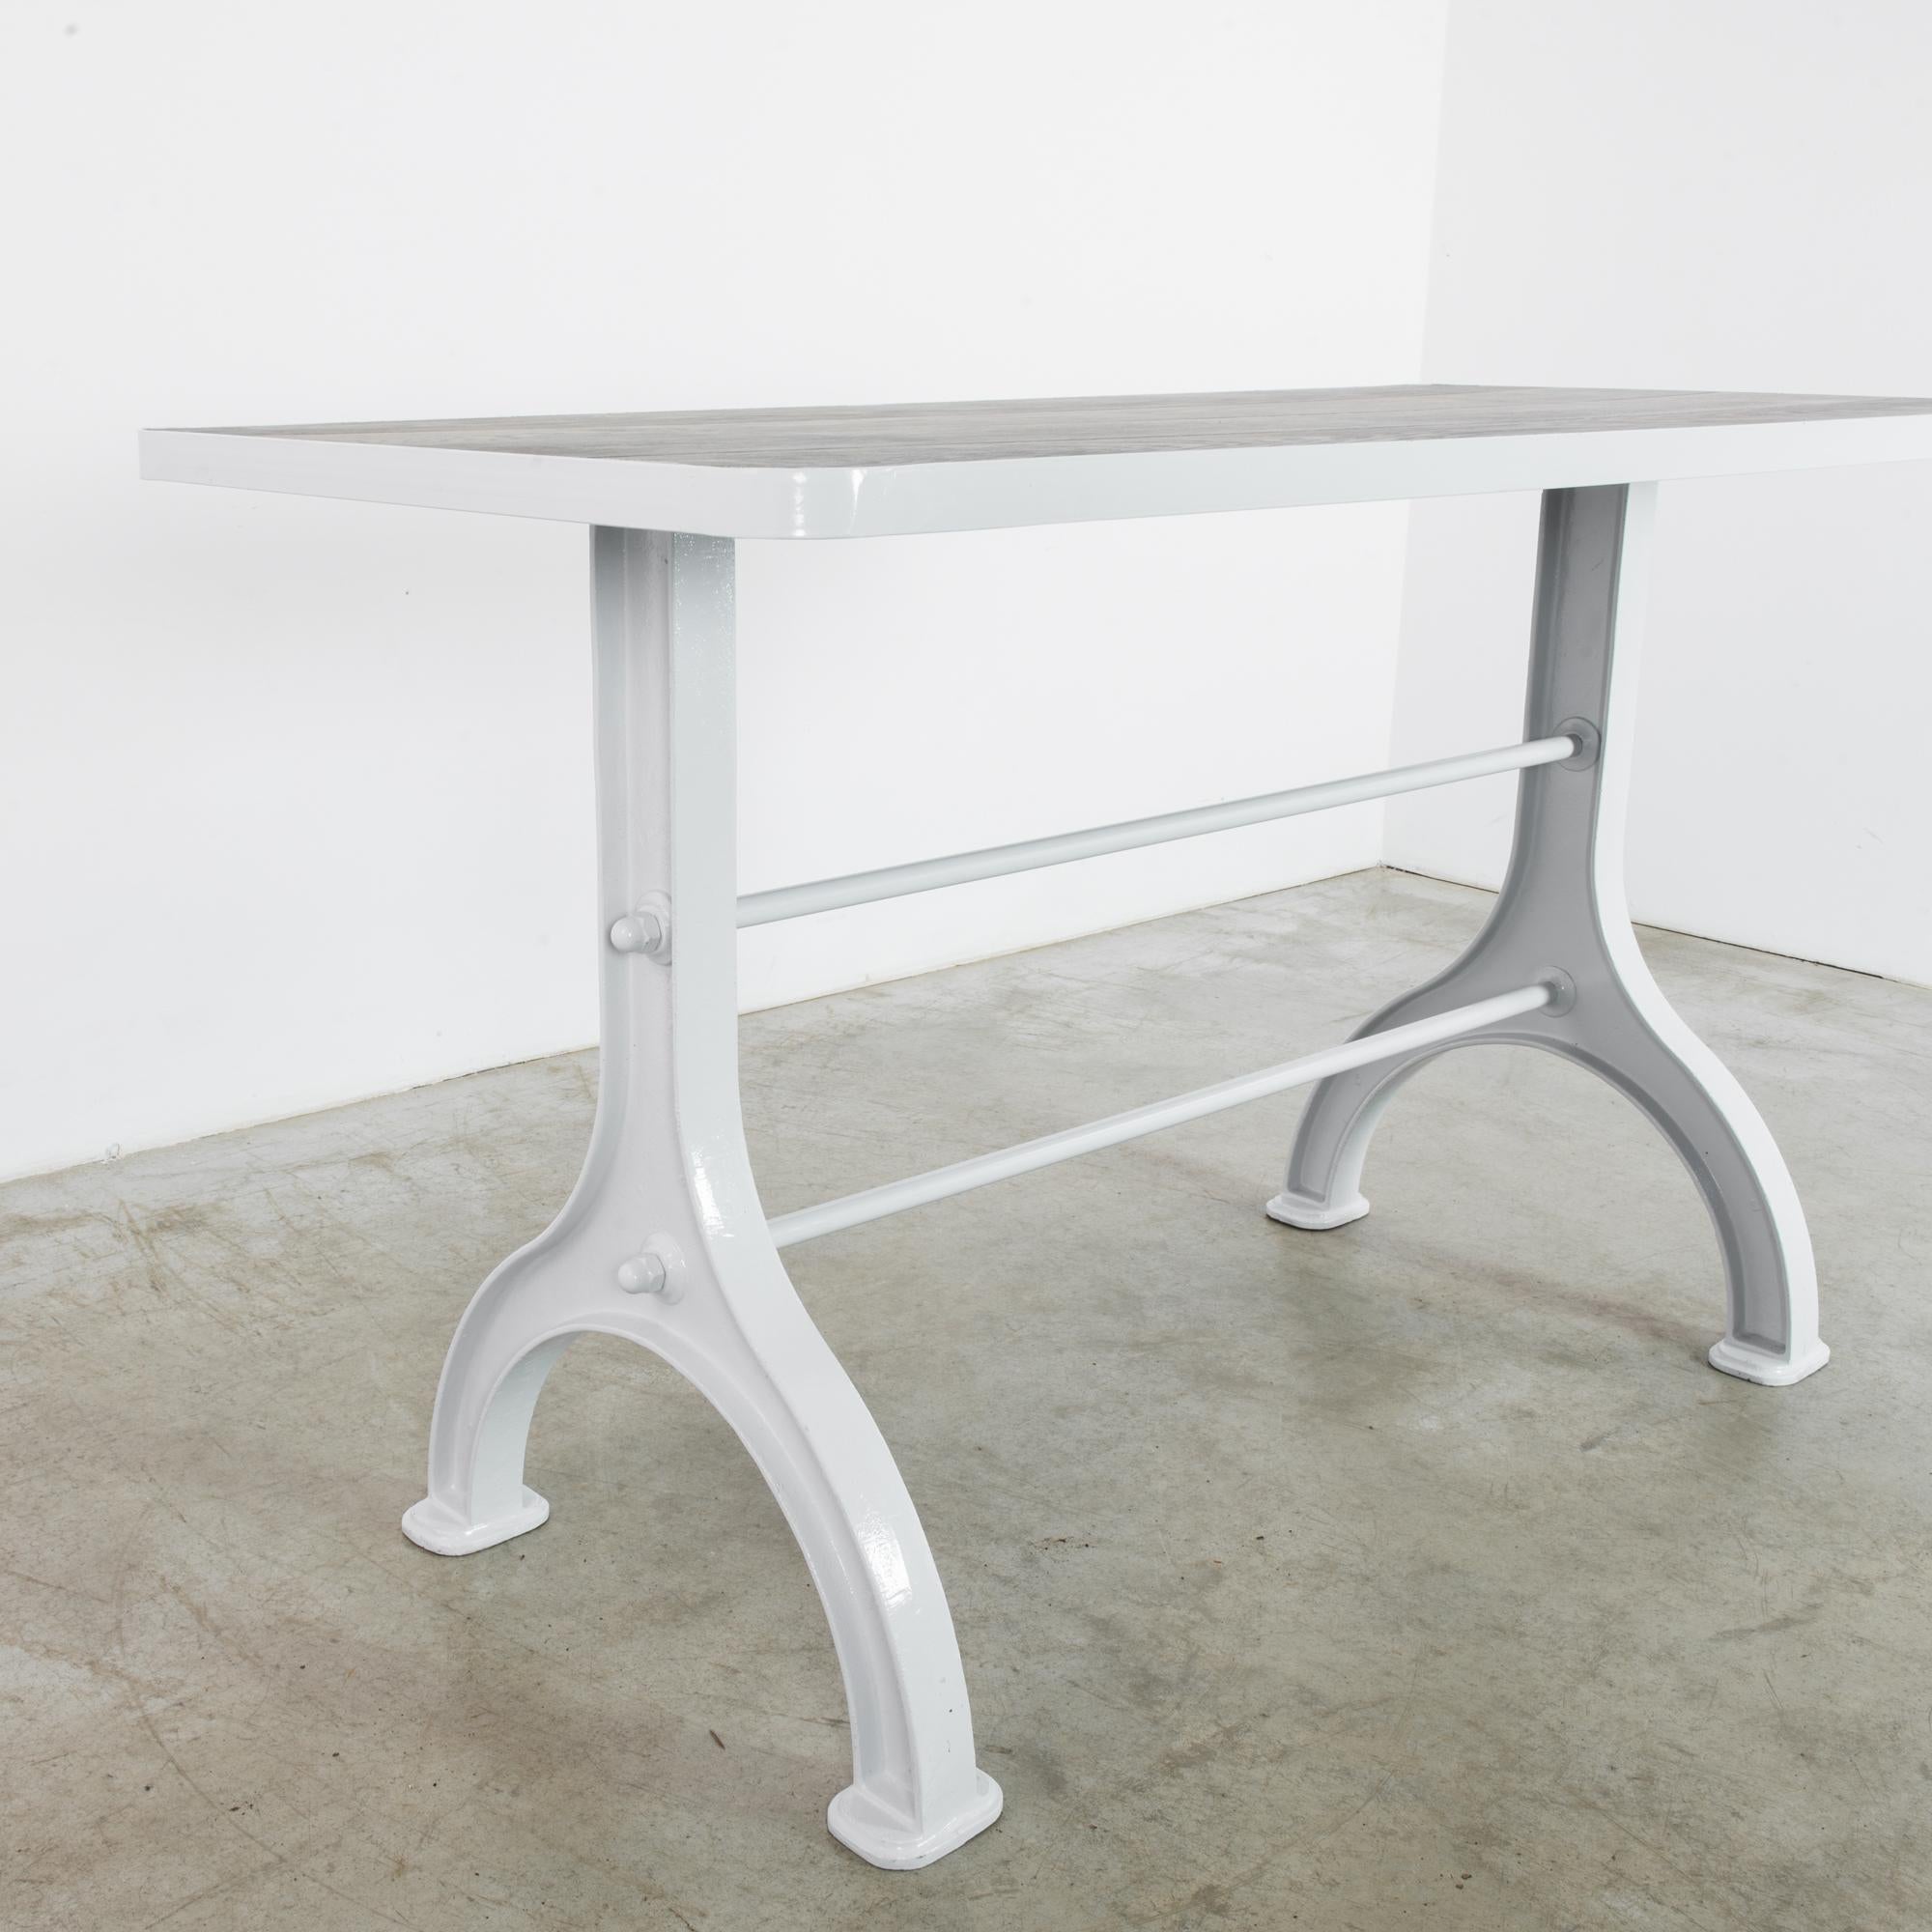 Prototype Cast Iron and Wooden Table 2